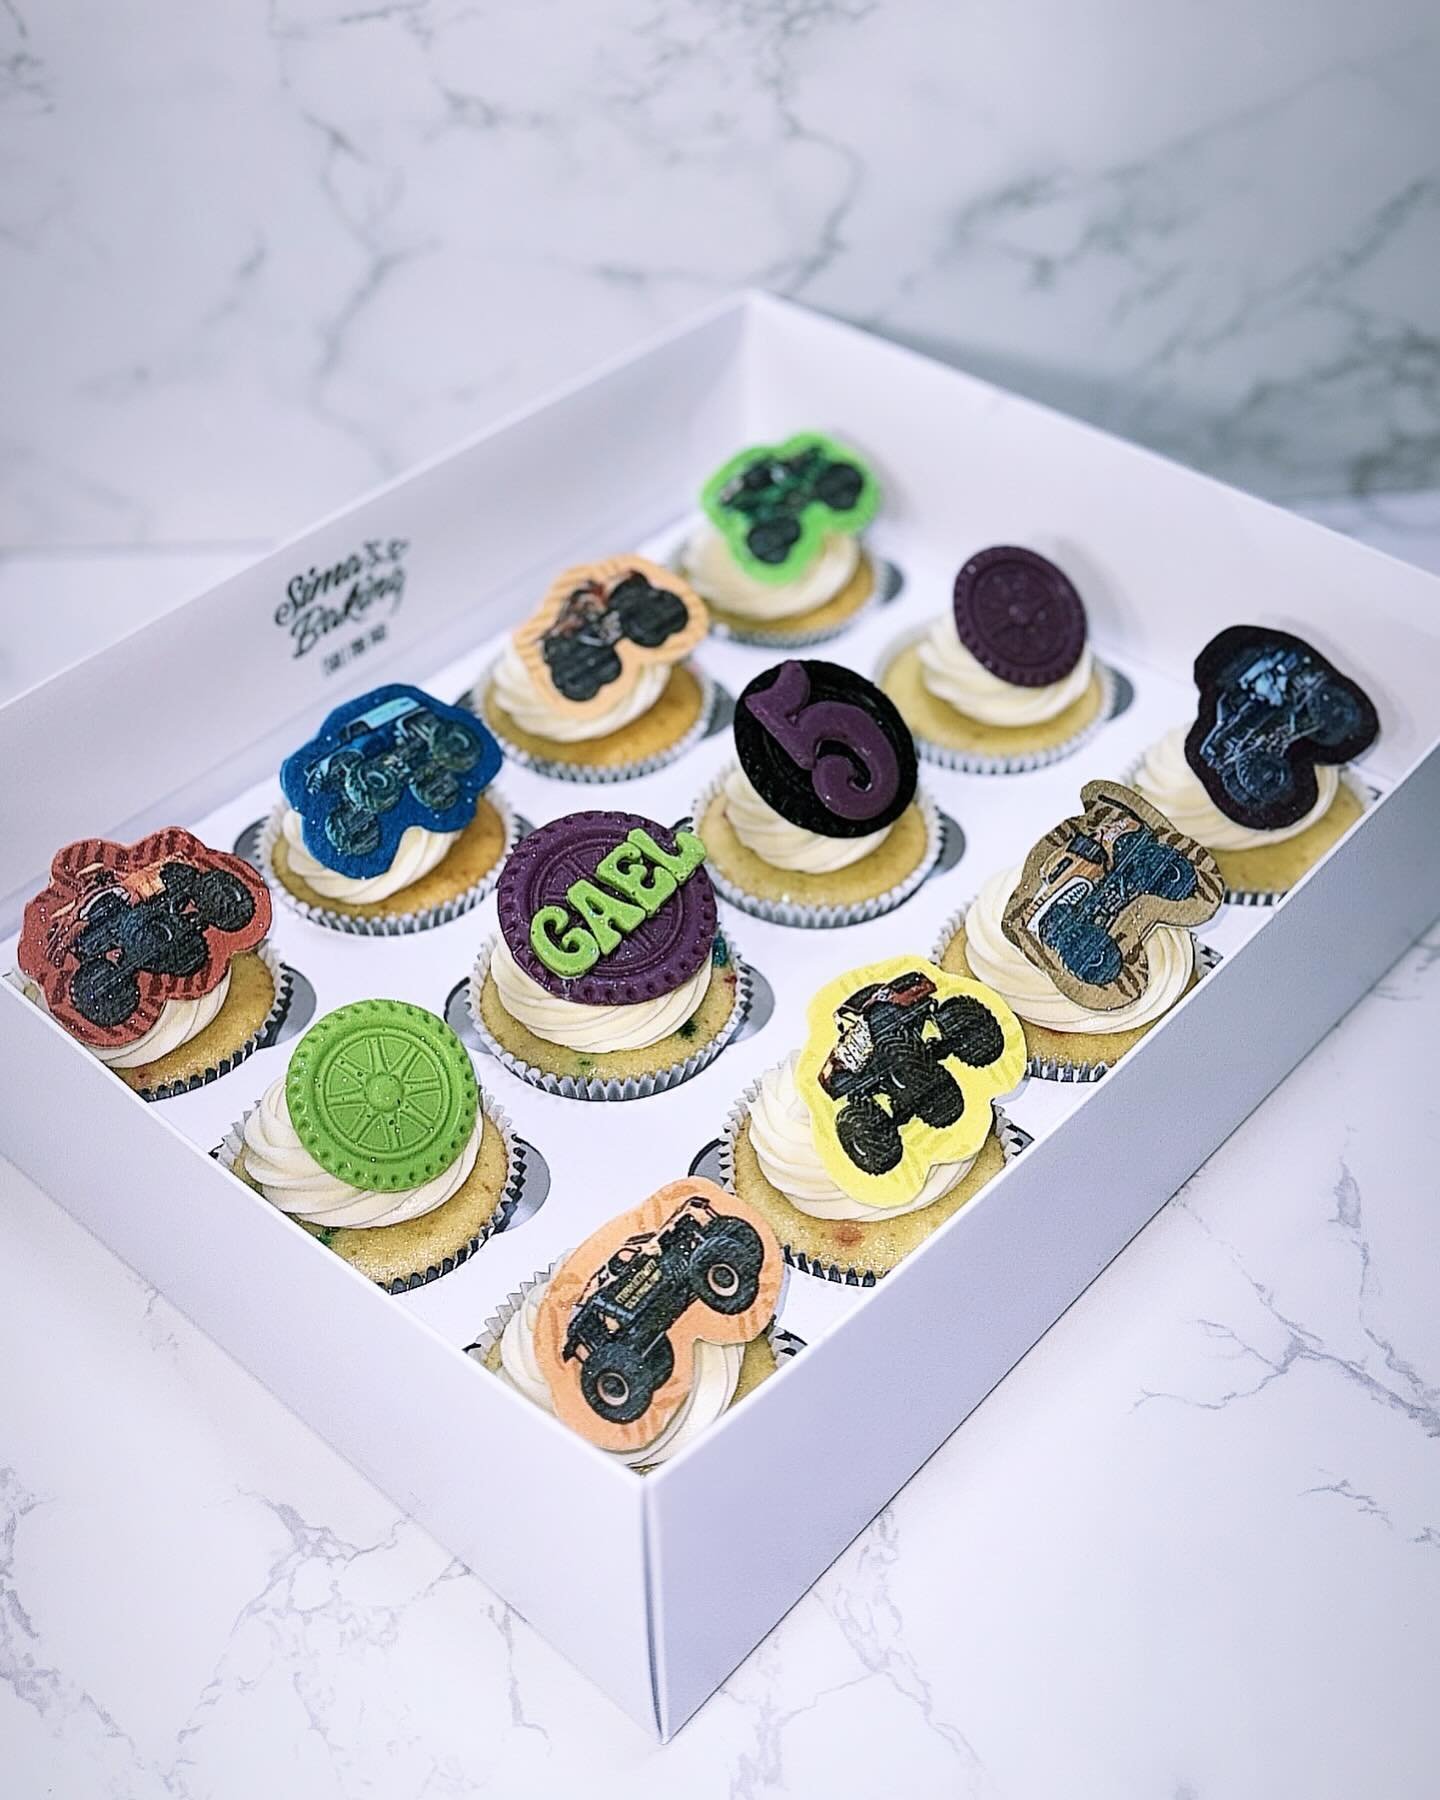 Monster Jam 💜💚🖤
Funfetti cupcakes topped with Swiss meringue vanilla buttercream, edible images &amp; chocolate elements. 

To order yours use the link in my bio. 

-

#cupcakeshop #monsterjam #cupcakebirthday #birthdayboys #boysbirthday #customcu